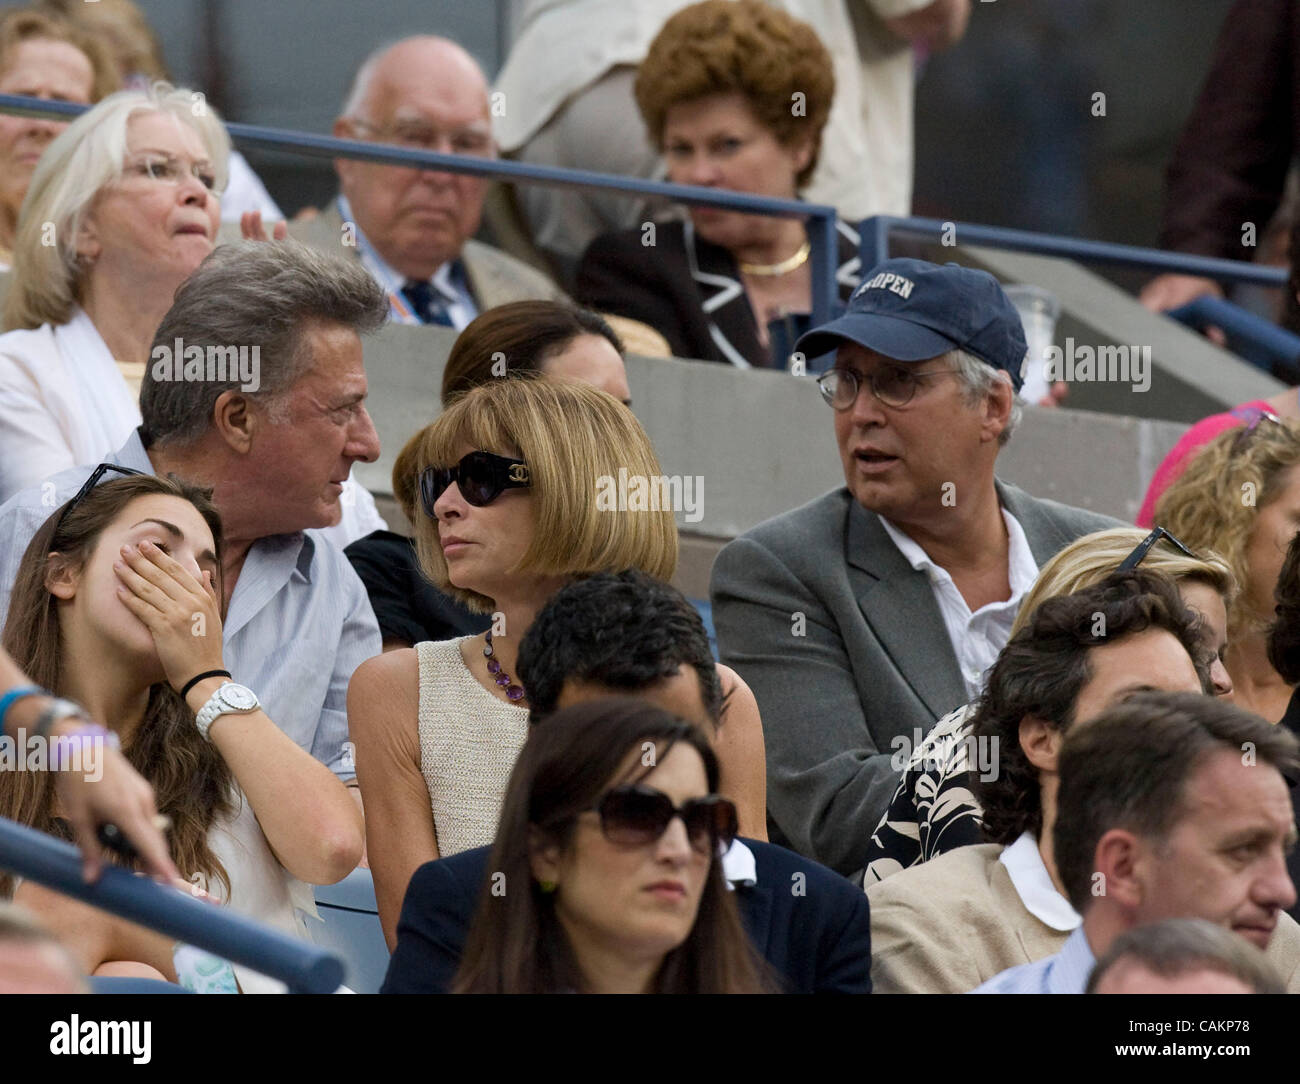 Anna Wintour watches as  Roger Federer defeats Novak Djokovic for his fourth straight title  at the 2007 US Open Tennis Championships men's final.  Dustin Hoffman and Chevy Chase are also seated in the President's Box. Stock Photo